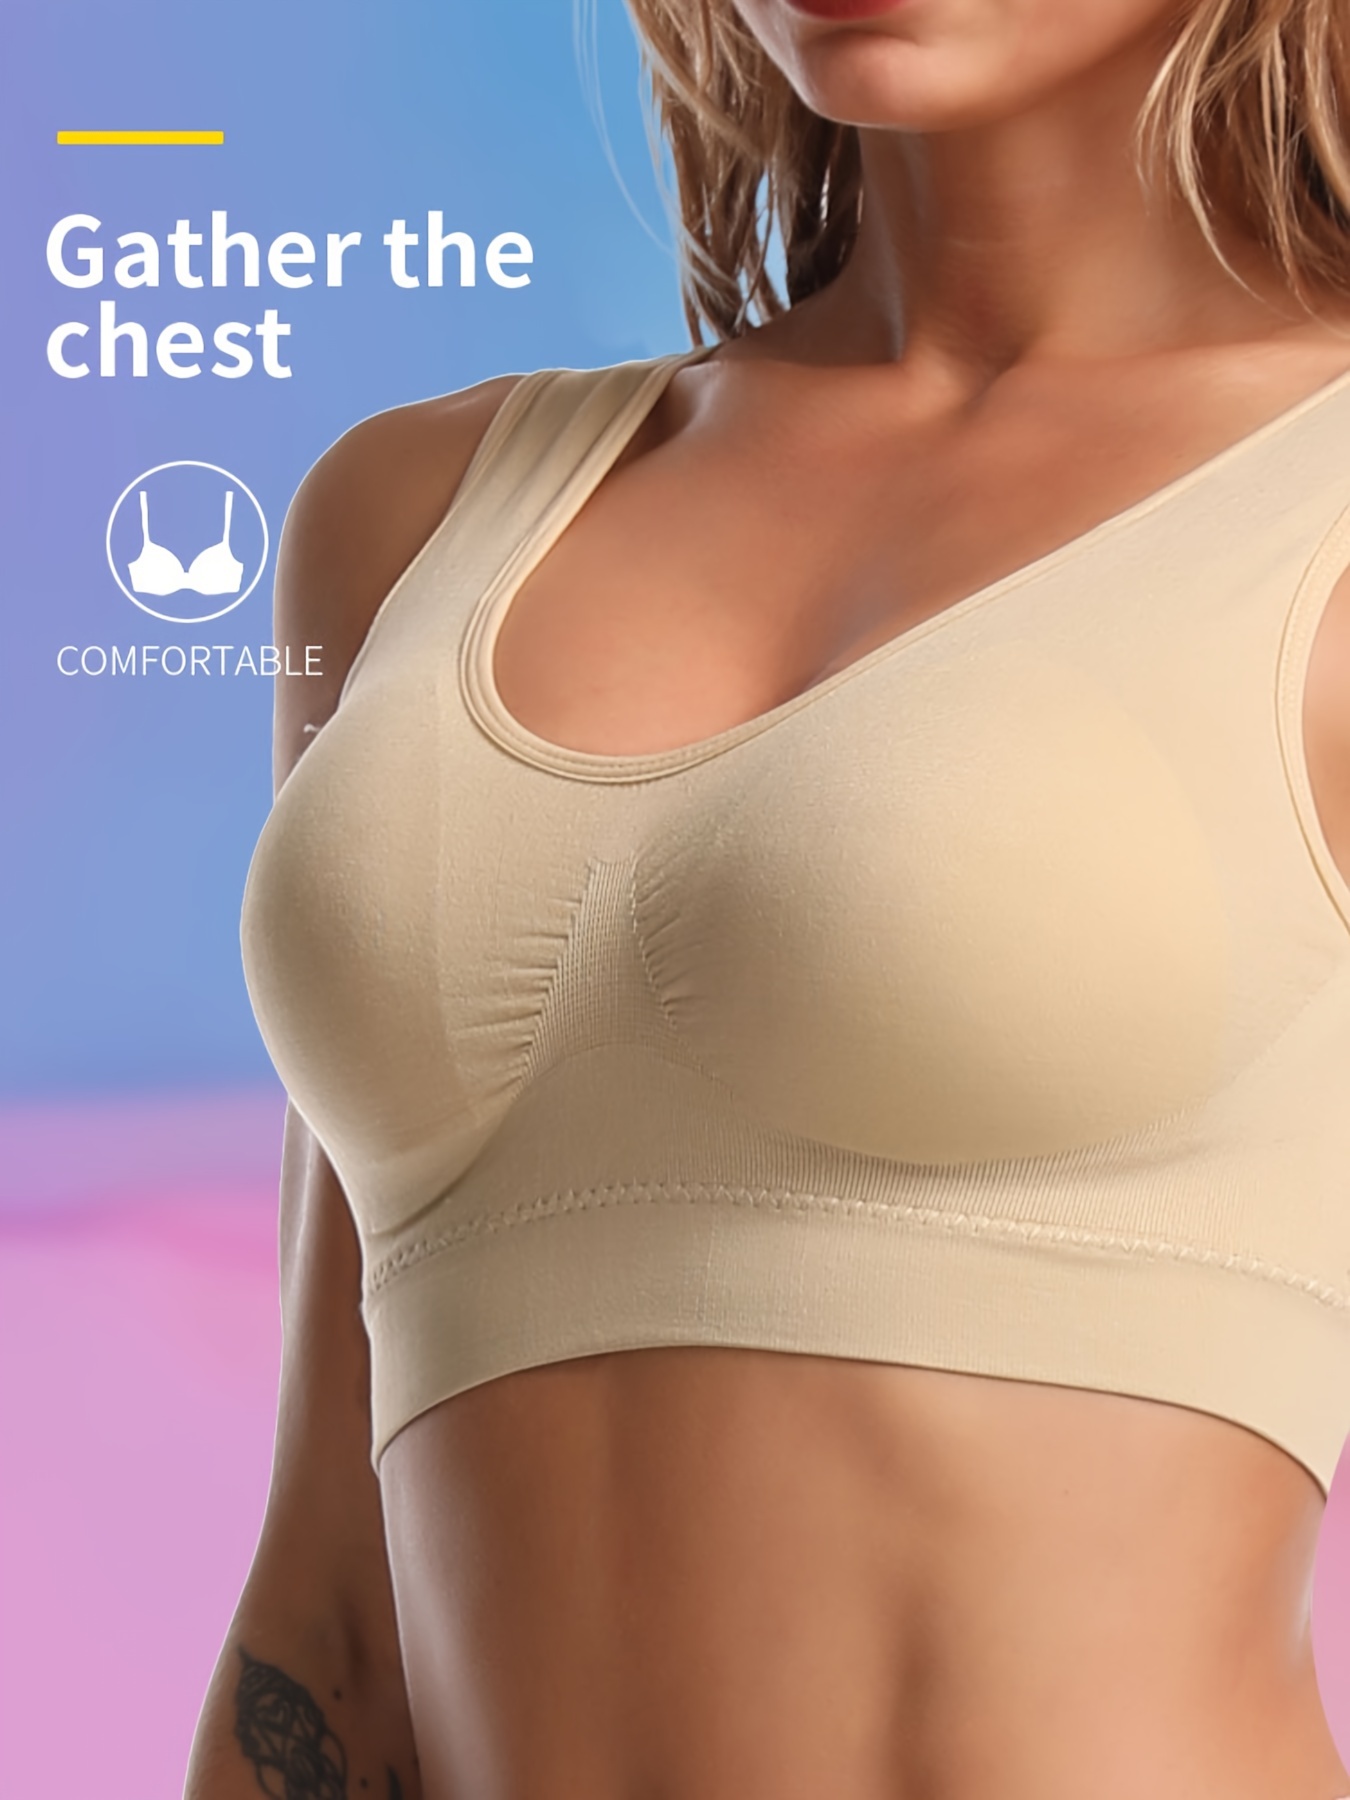 Sexy Seamless Push Up Sports Bra With Pad For Women Wireless